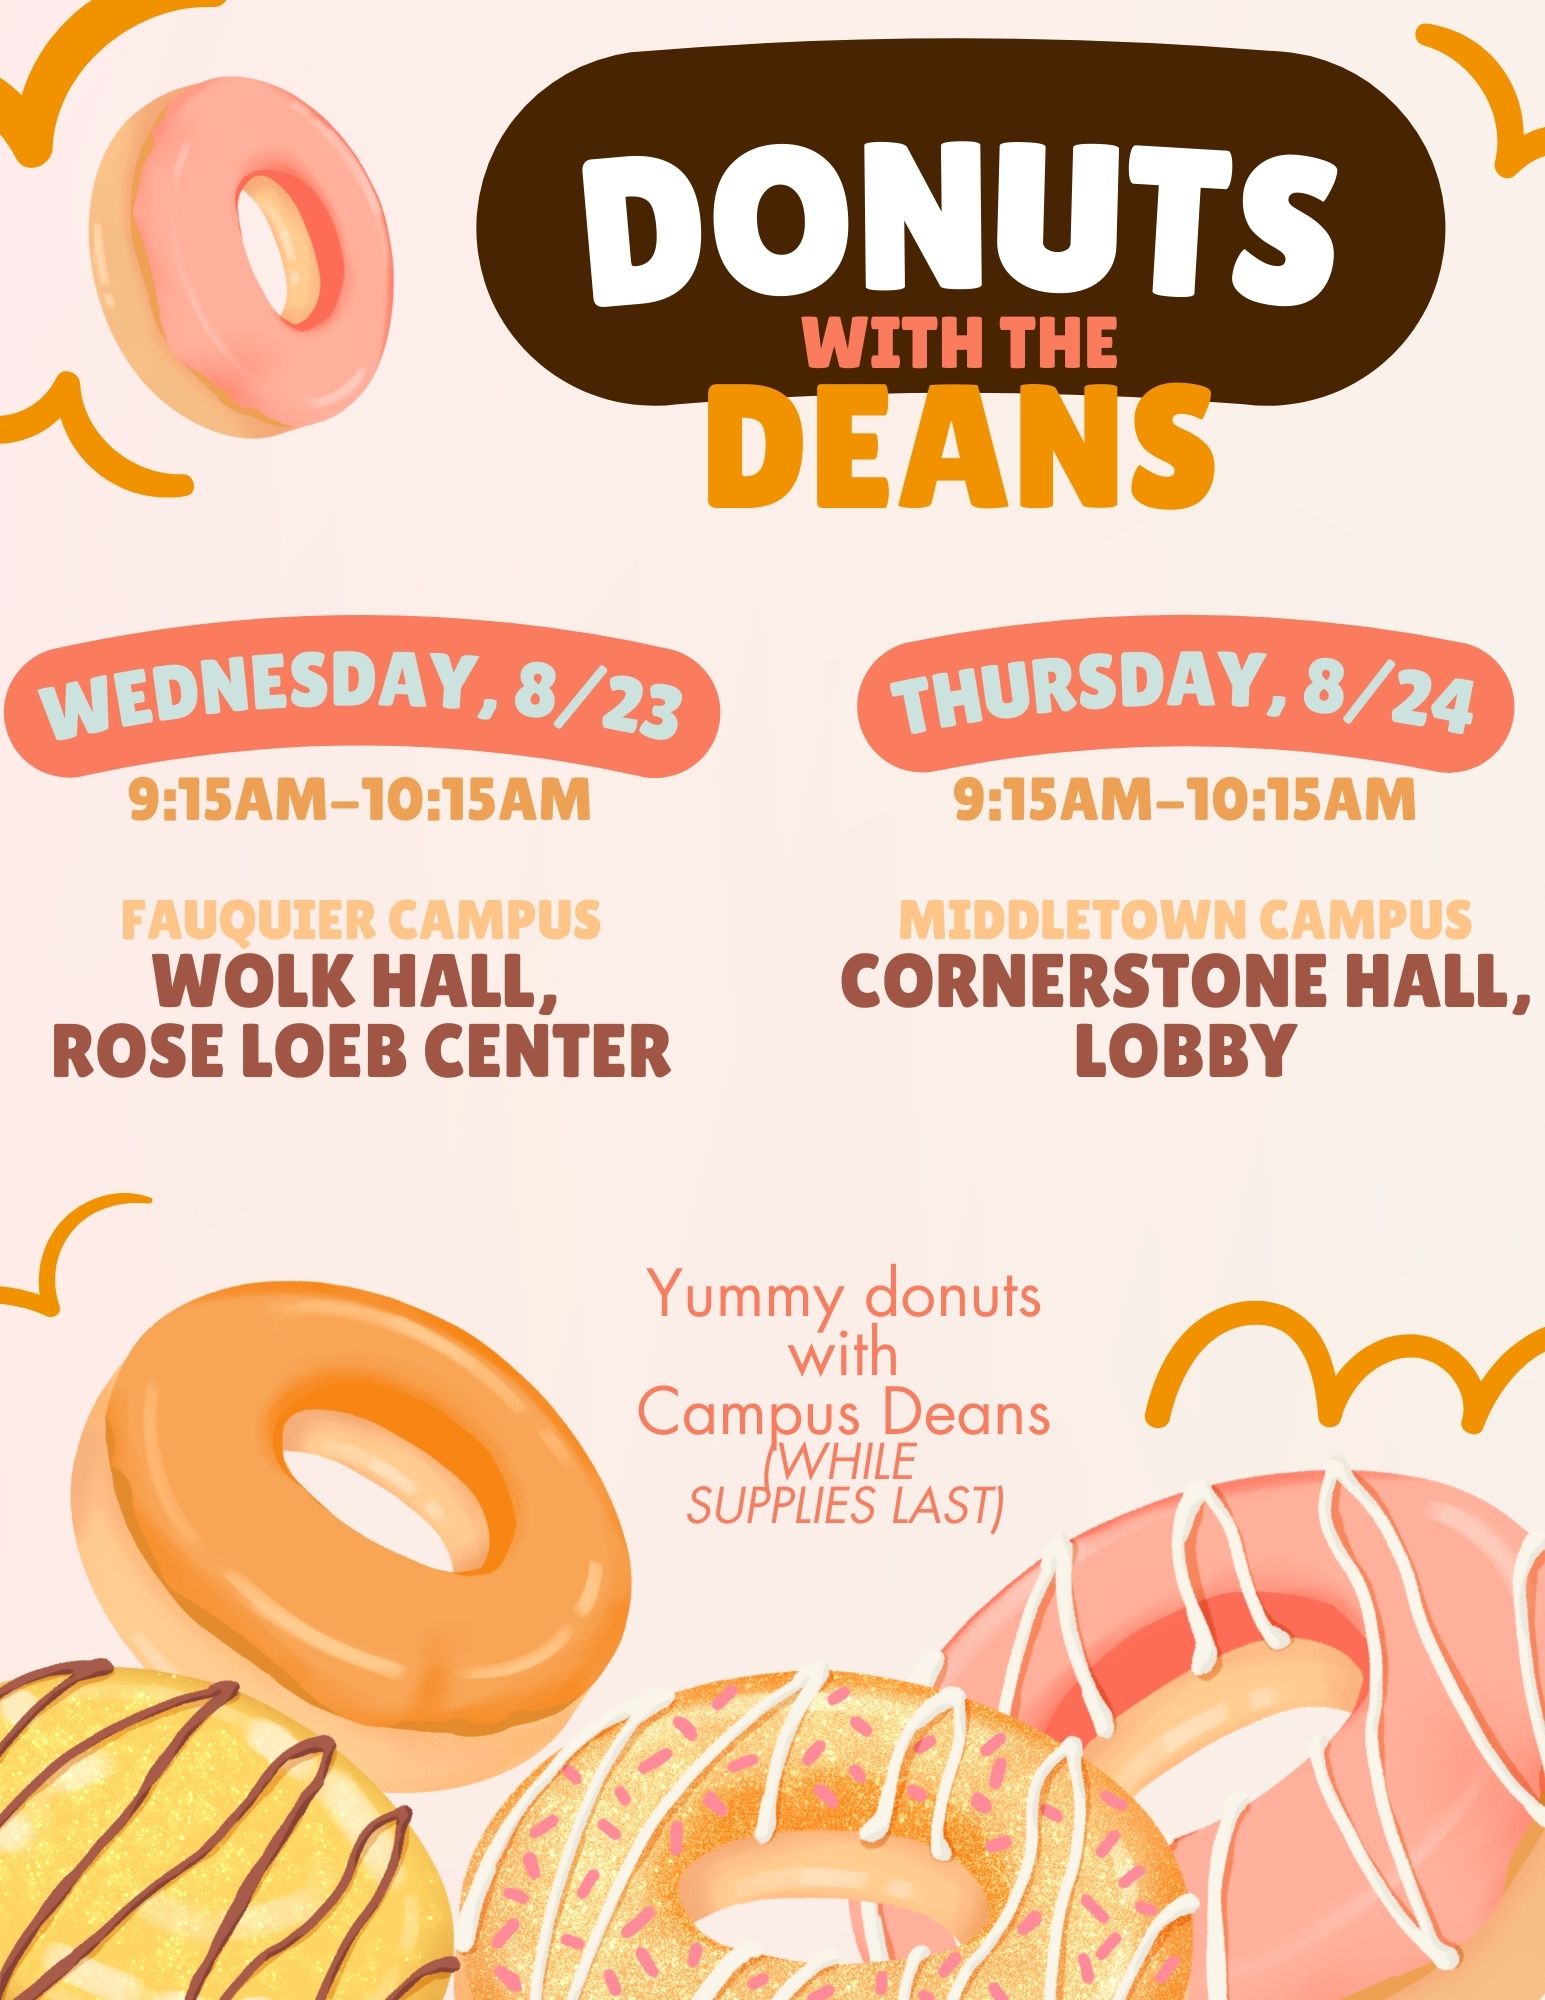 Donuts with the Deans - Fall 23